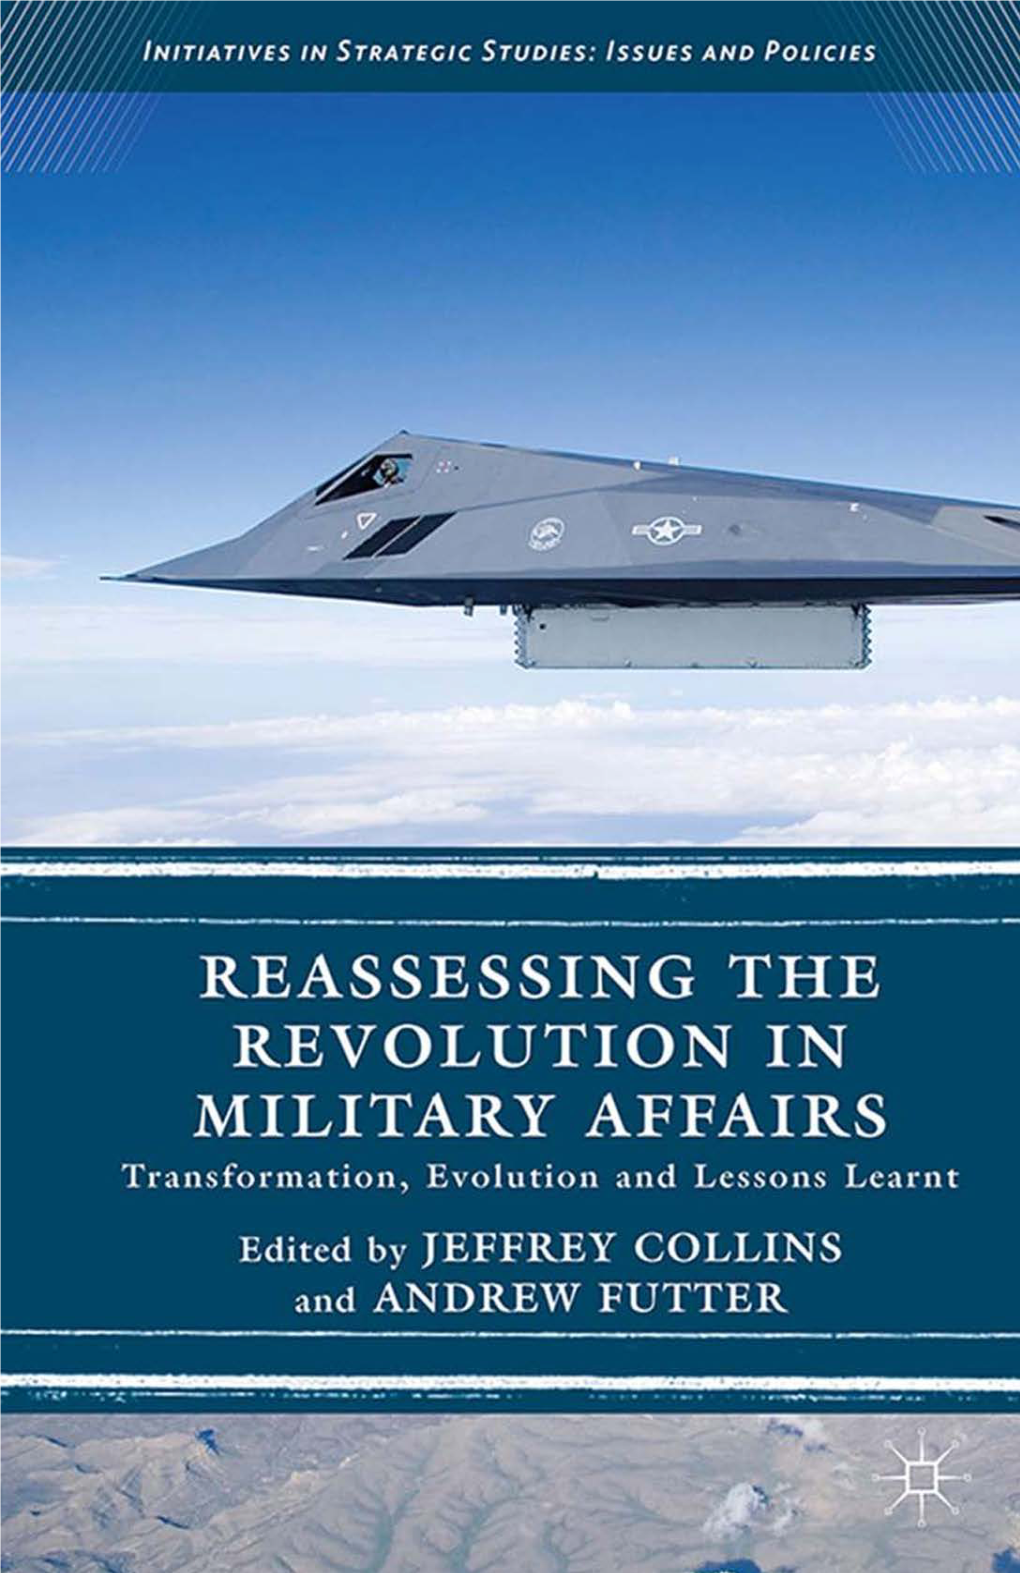 Reassessing the Revolution in Military Affairs Initiatives in Strategic Studies: Issues and Policies